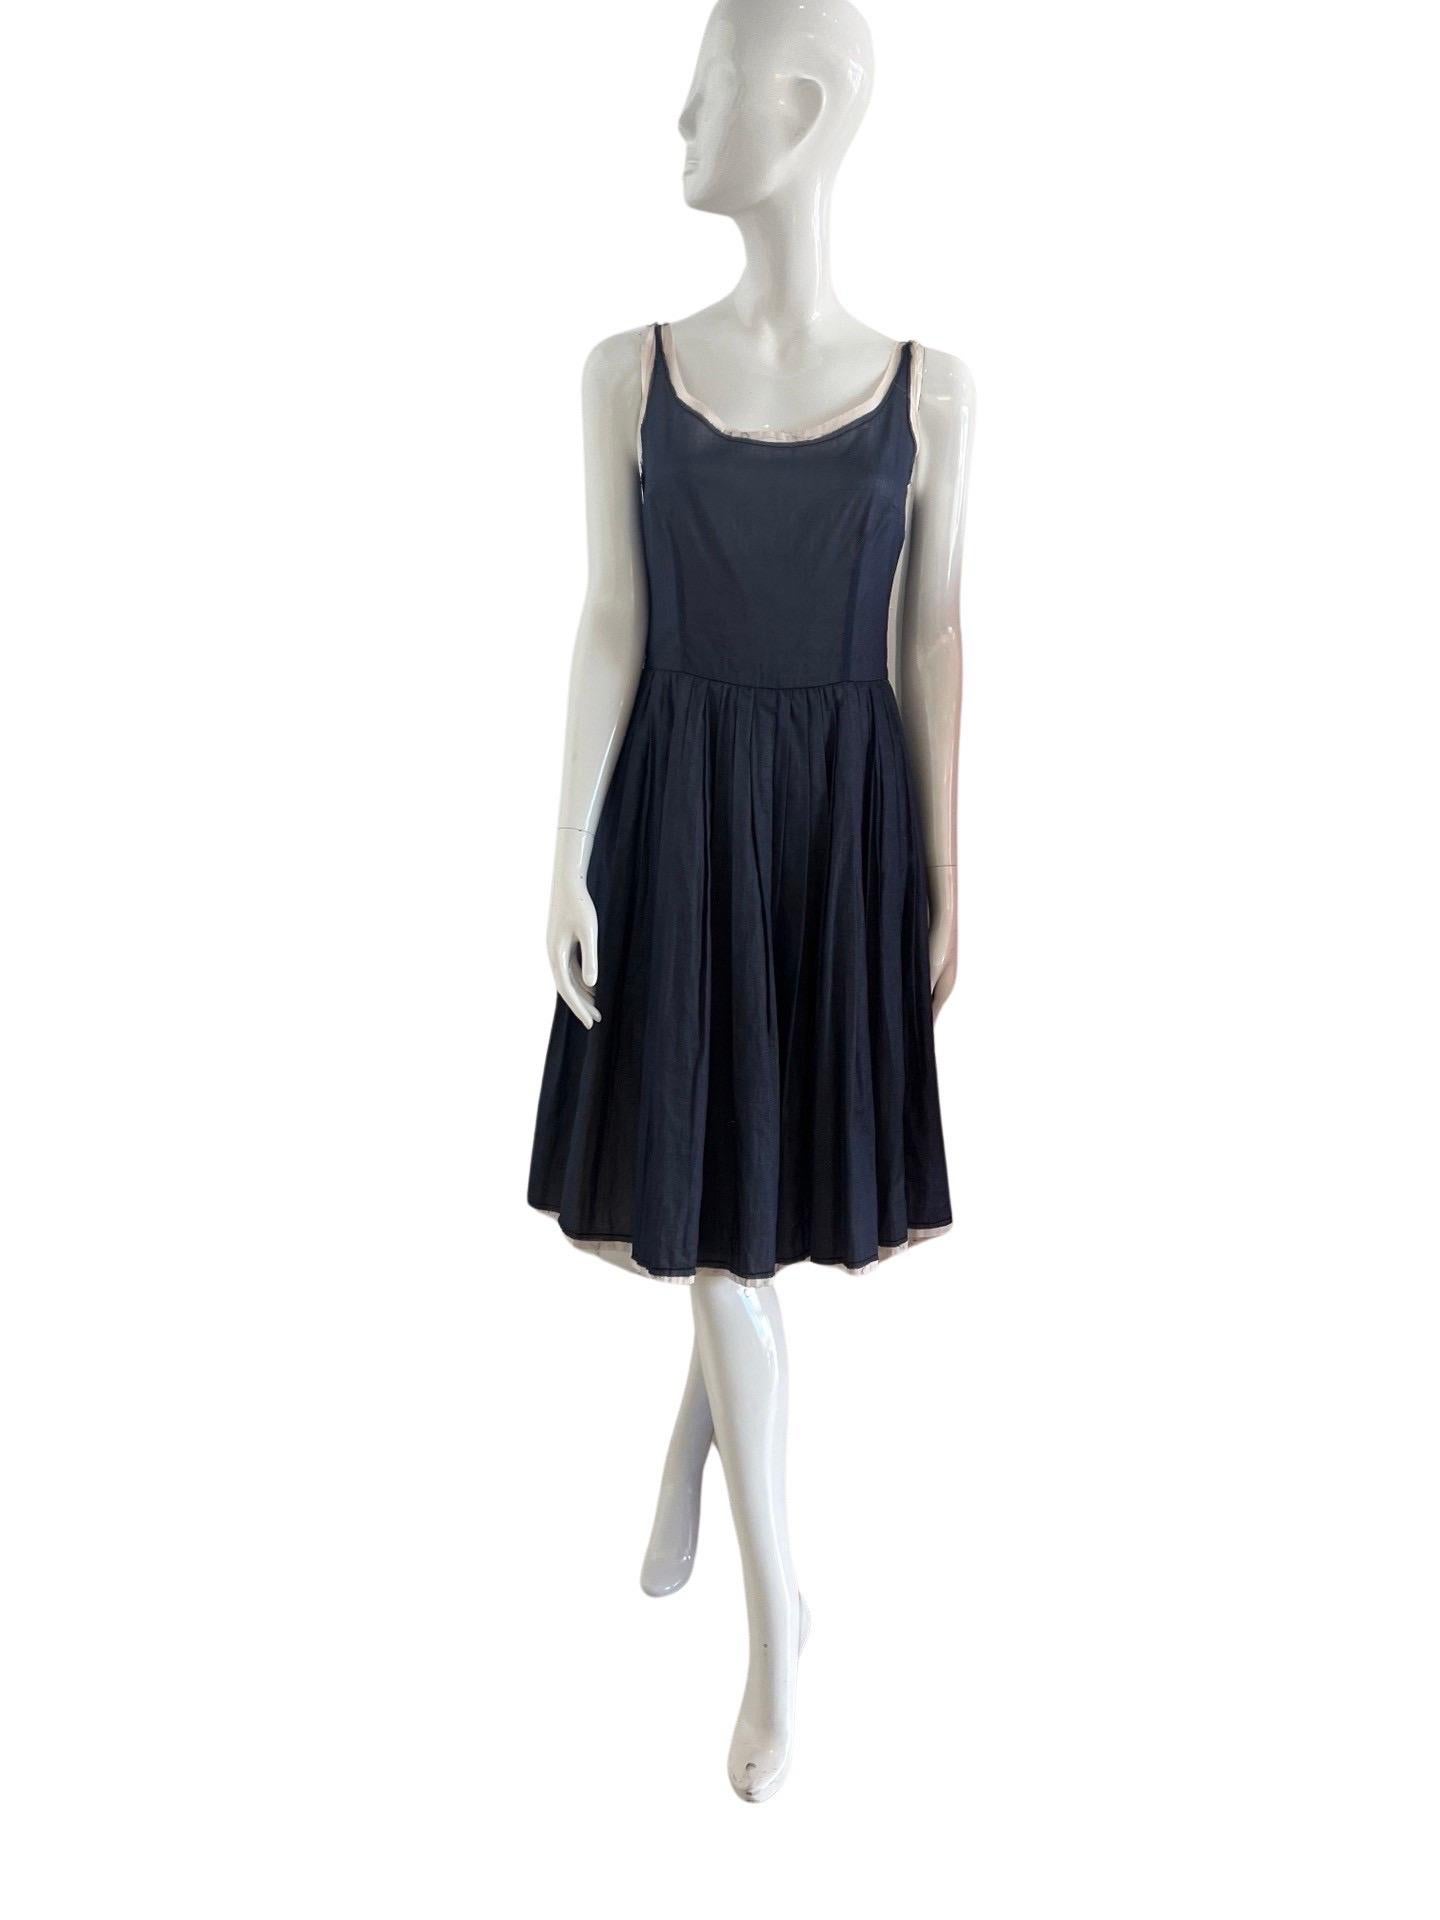 Prada Sport Chambray Pleated Dress For Sale 1